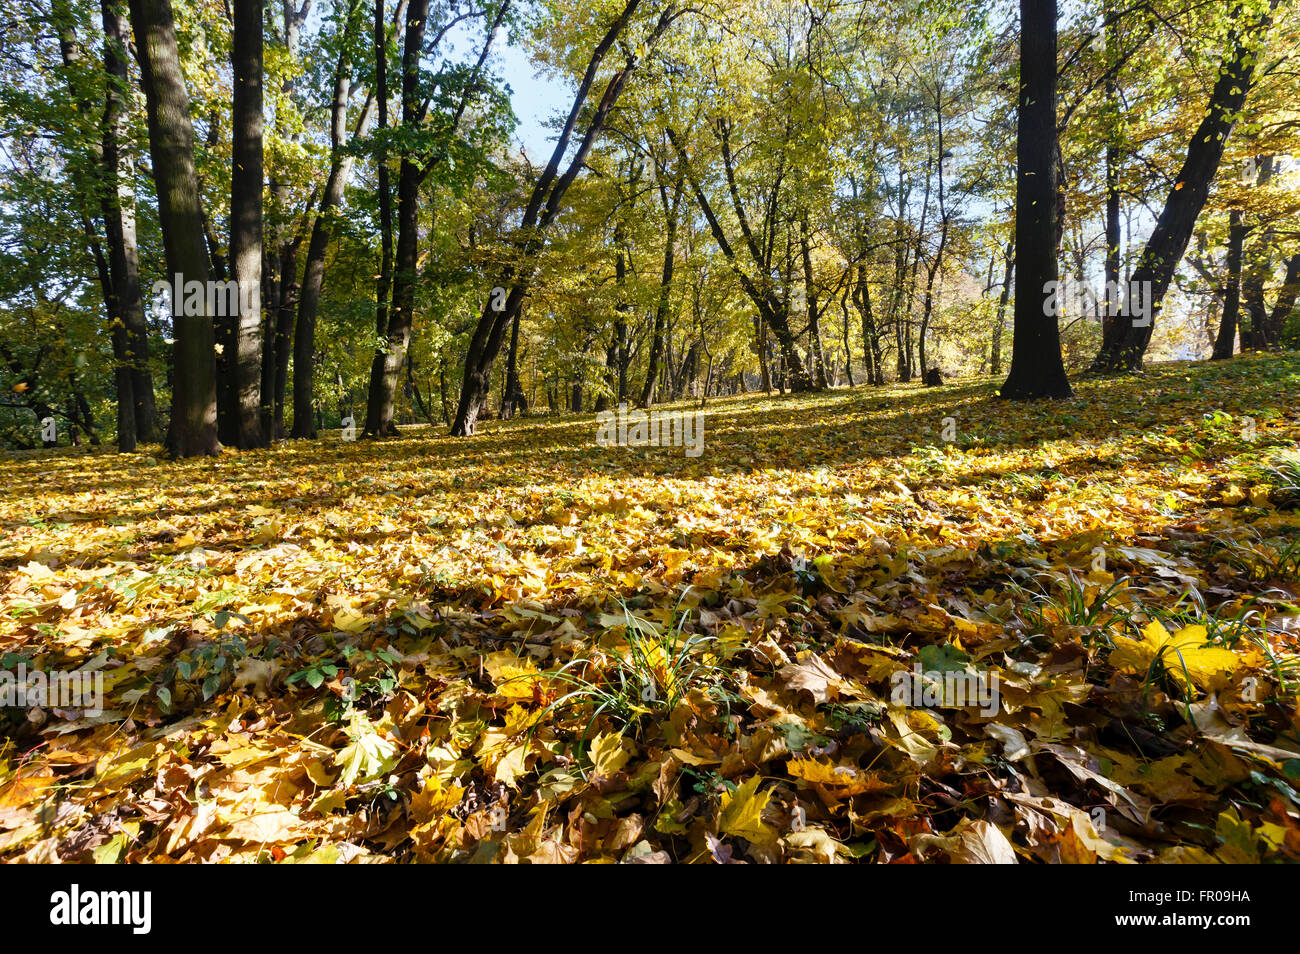 Green-yellow carpet of autumn leaves with shadow of trees in city park. Stock Photo